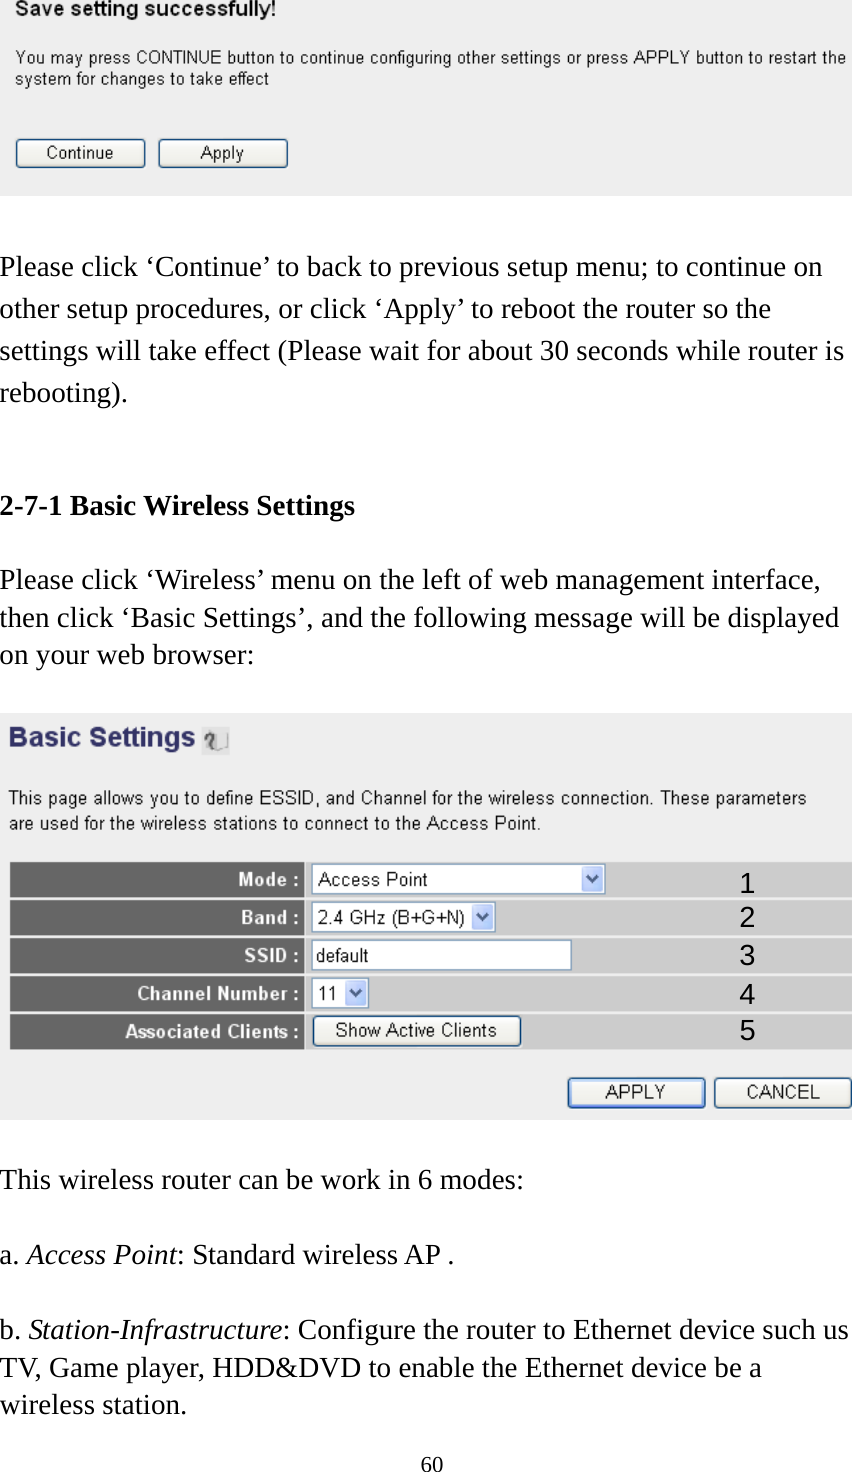 60   Please click ‘Continue’ to back to previous setup menu; to continue on other setup procedures, or click ‘Apply’ to reboot the router so the settings will take effect (Please wait for about 30 seconds while router is rebooting).   2-7-1 Basic Wireless Settings  Please click ‘Wireless’ menu on the left of web management interface, then click ‘Basic Settings’, and the following message will be displayed on your web browser:    This wireless router can be work in 6 modes:    a. Access Point: Standard wireless AP .  b. Station-Infrastructure: Configure the router to Ethernet device such us TV, Game player, HDD&amp;DVD to enable the Ethernet device be a wireless station. 1 2 3 4 5 